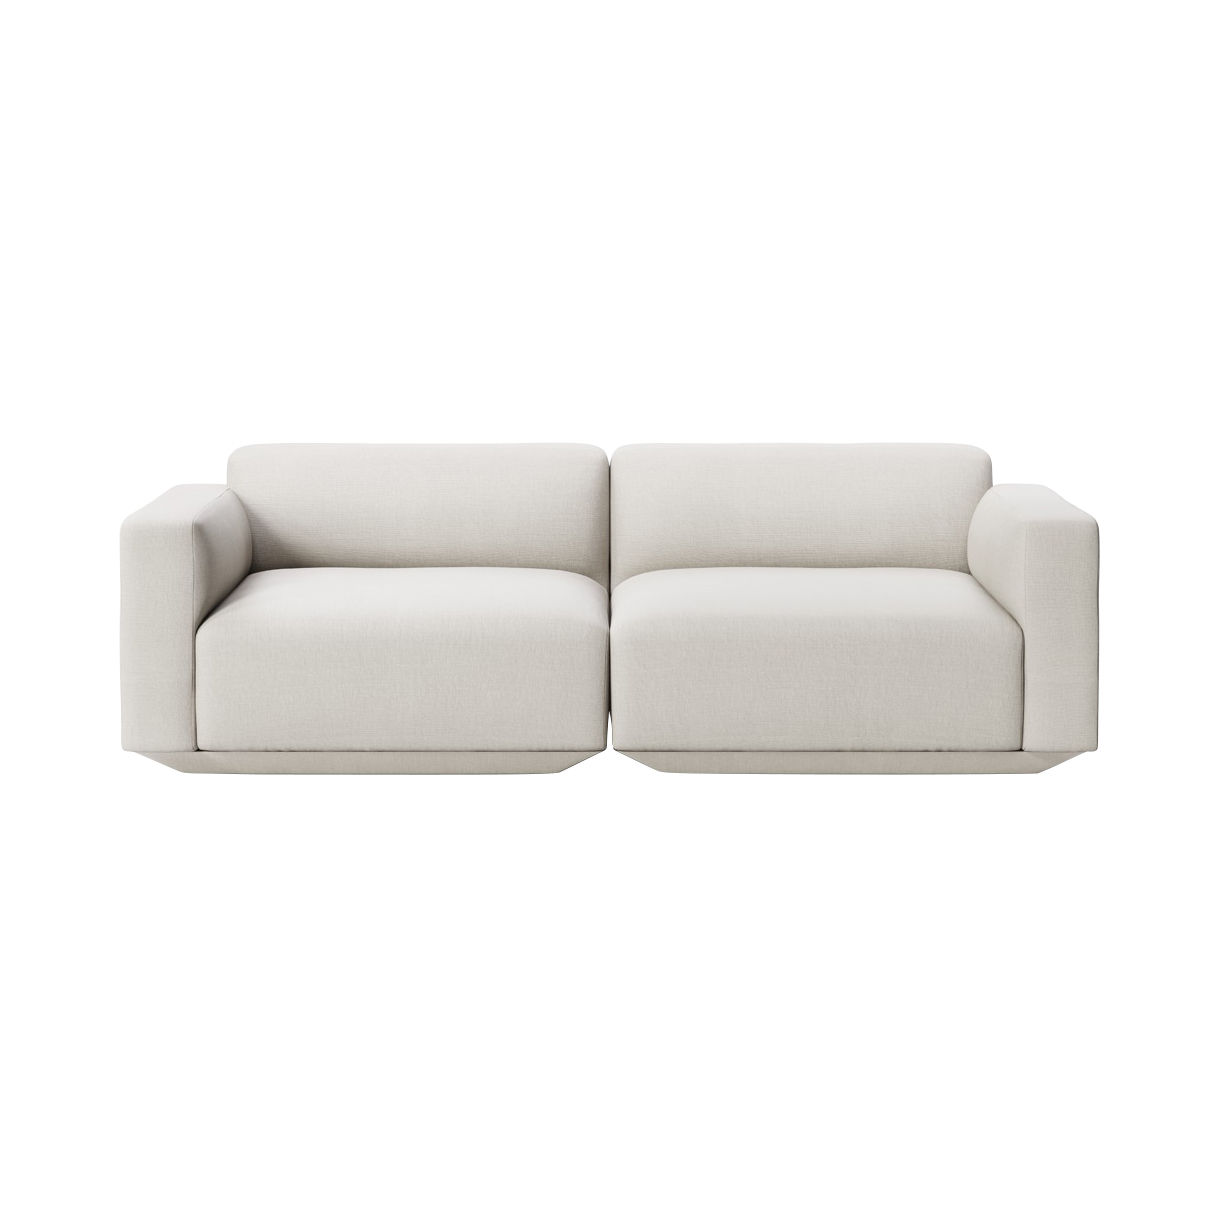 &tradition Develius A Straight sofa - Beige | Made In Design UK